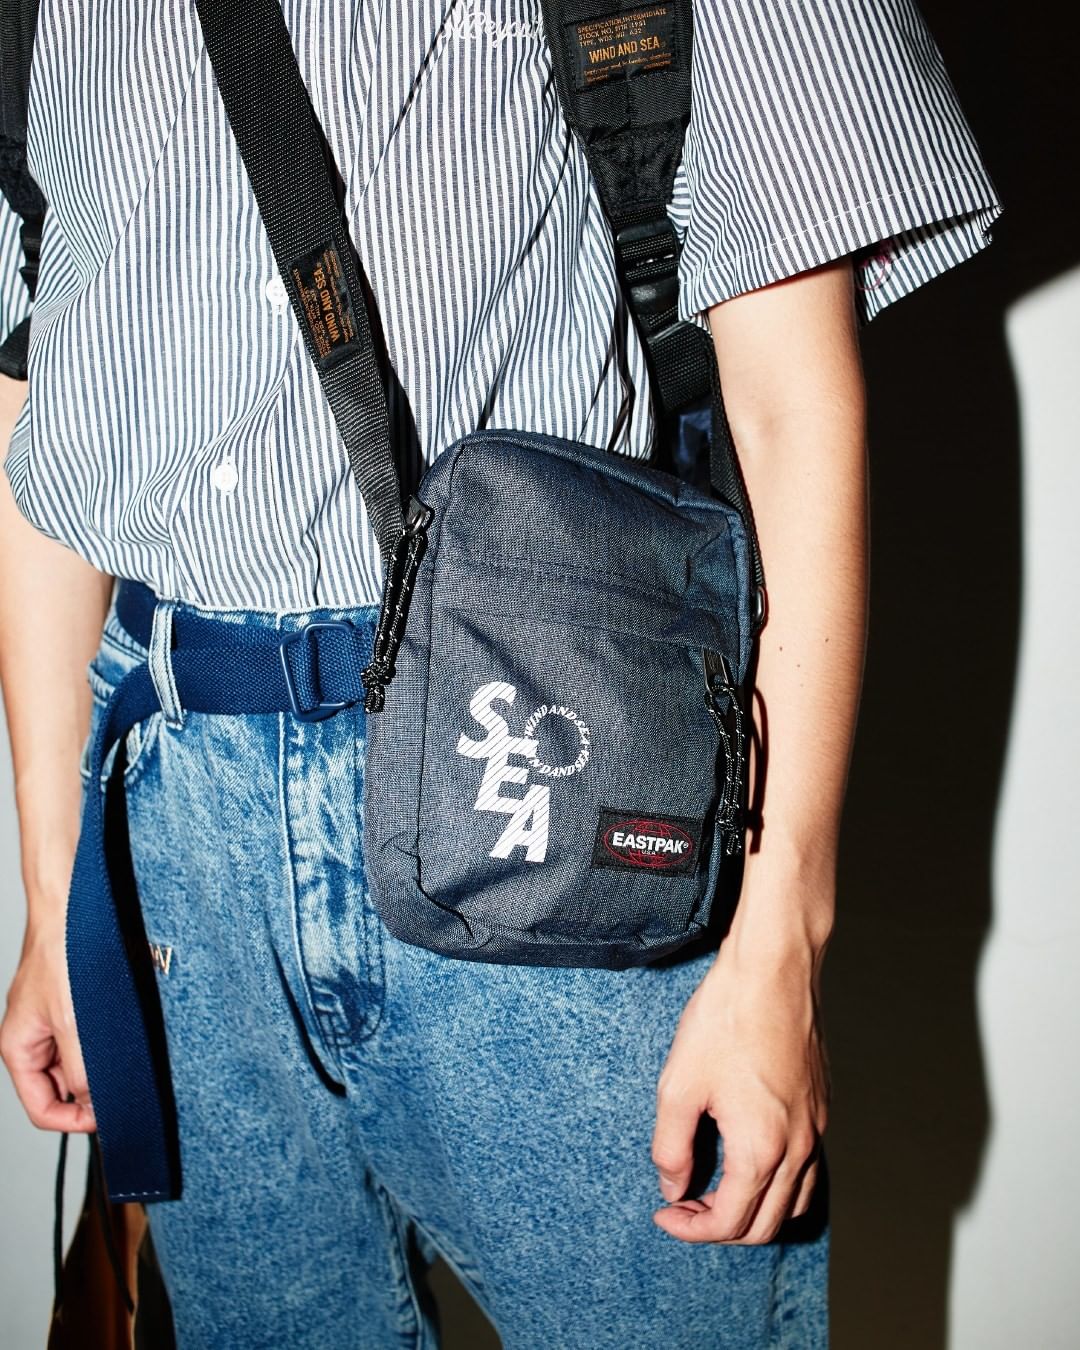 EASTPAK x WIND AND SEA 胶囊系列发布 – NOWRE现客